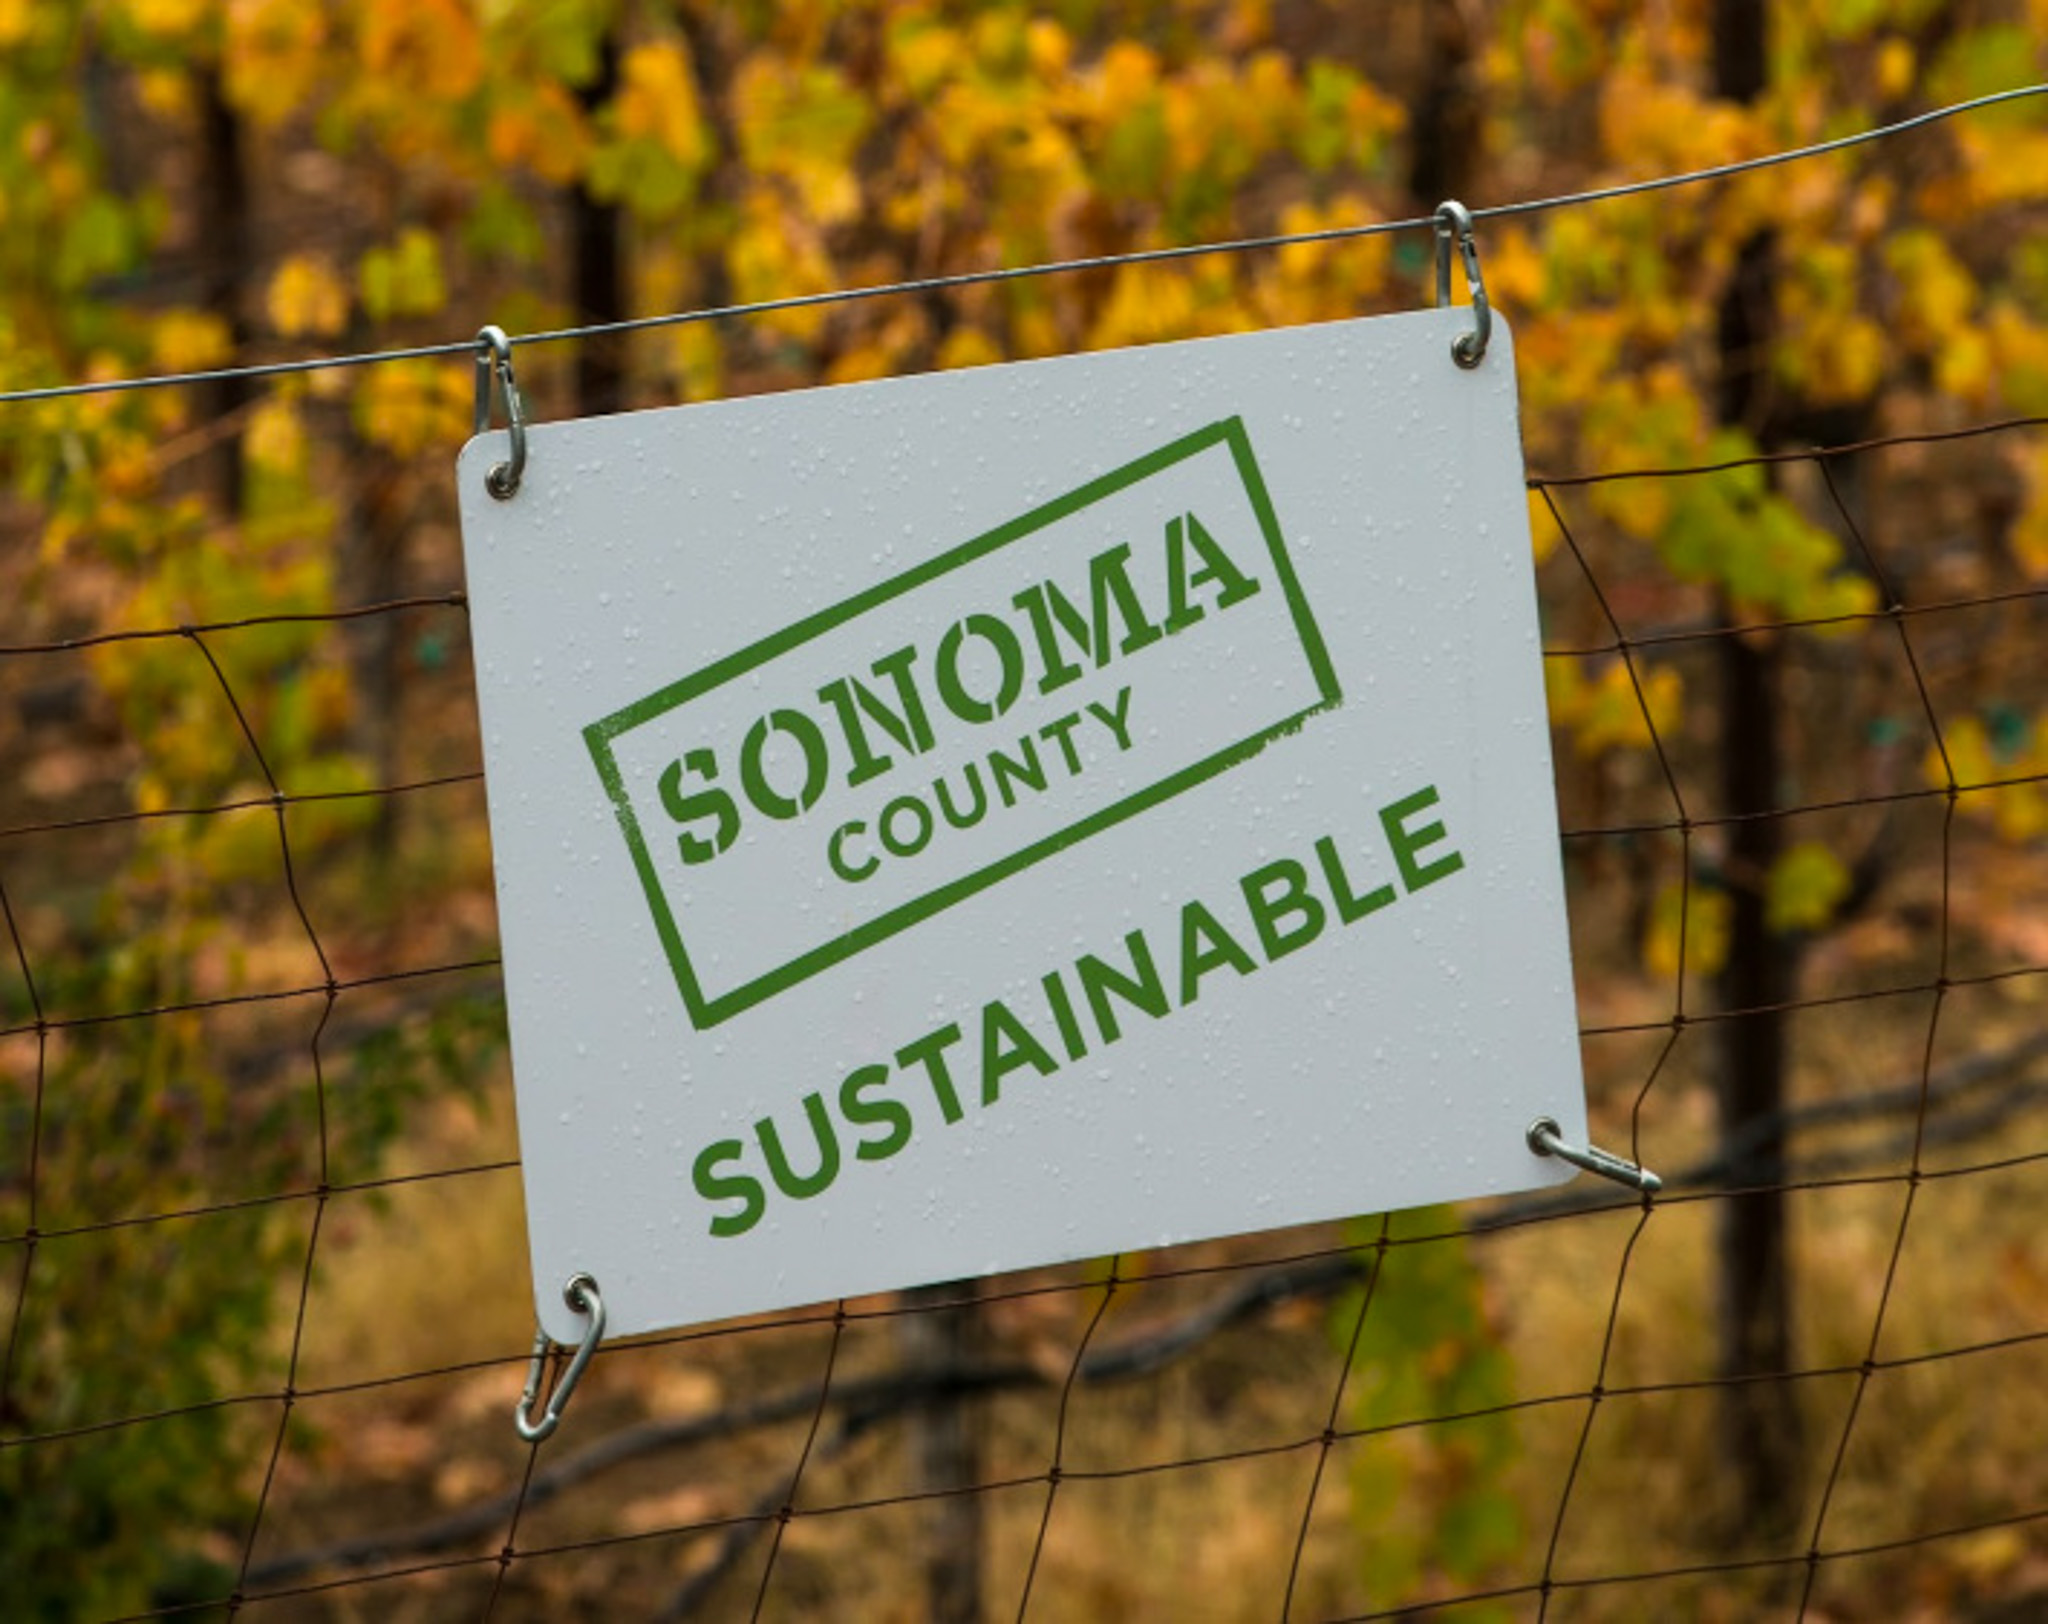 Sonoma County Sustainable sign on a fence